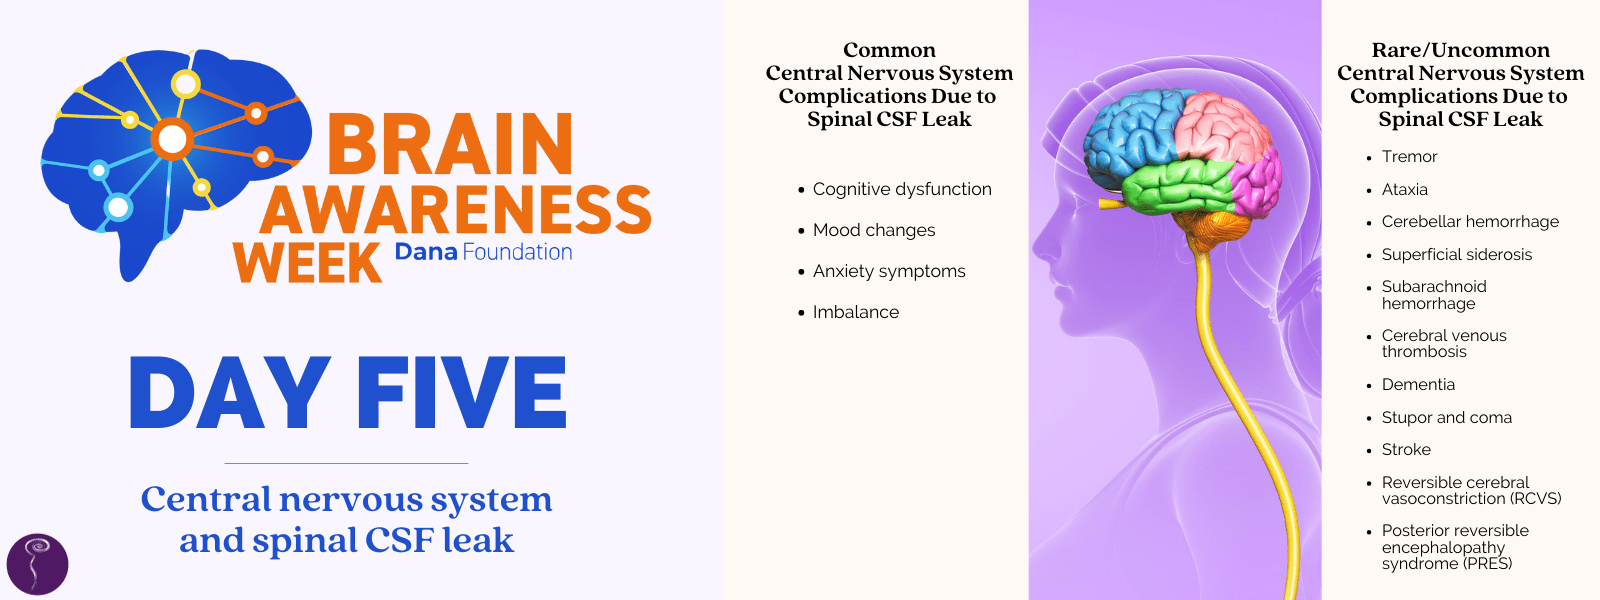 Brain awareness week day five: central nervous system and spinal CSF leak